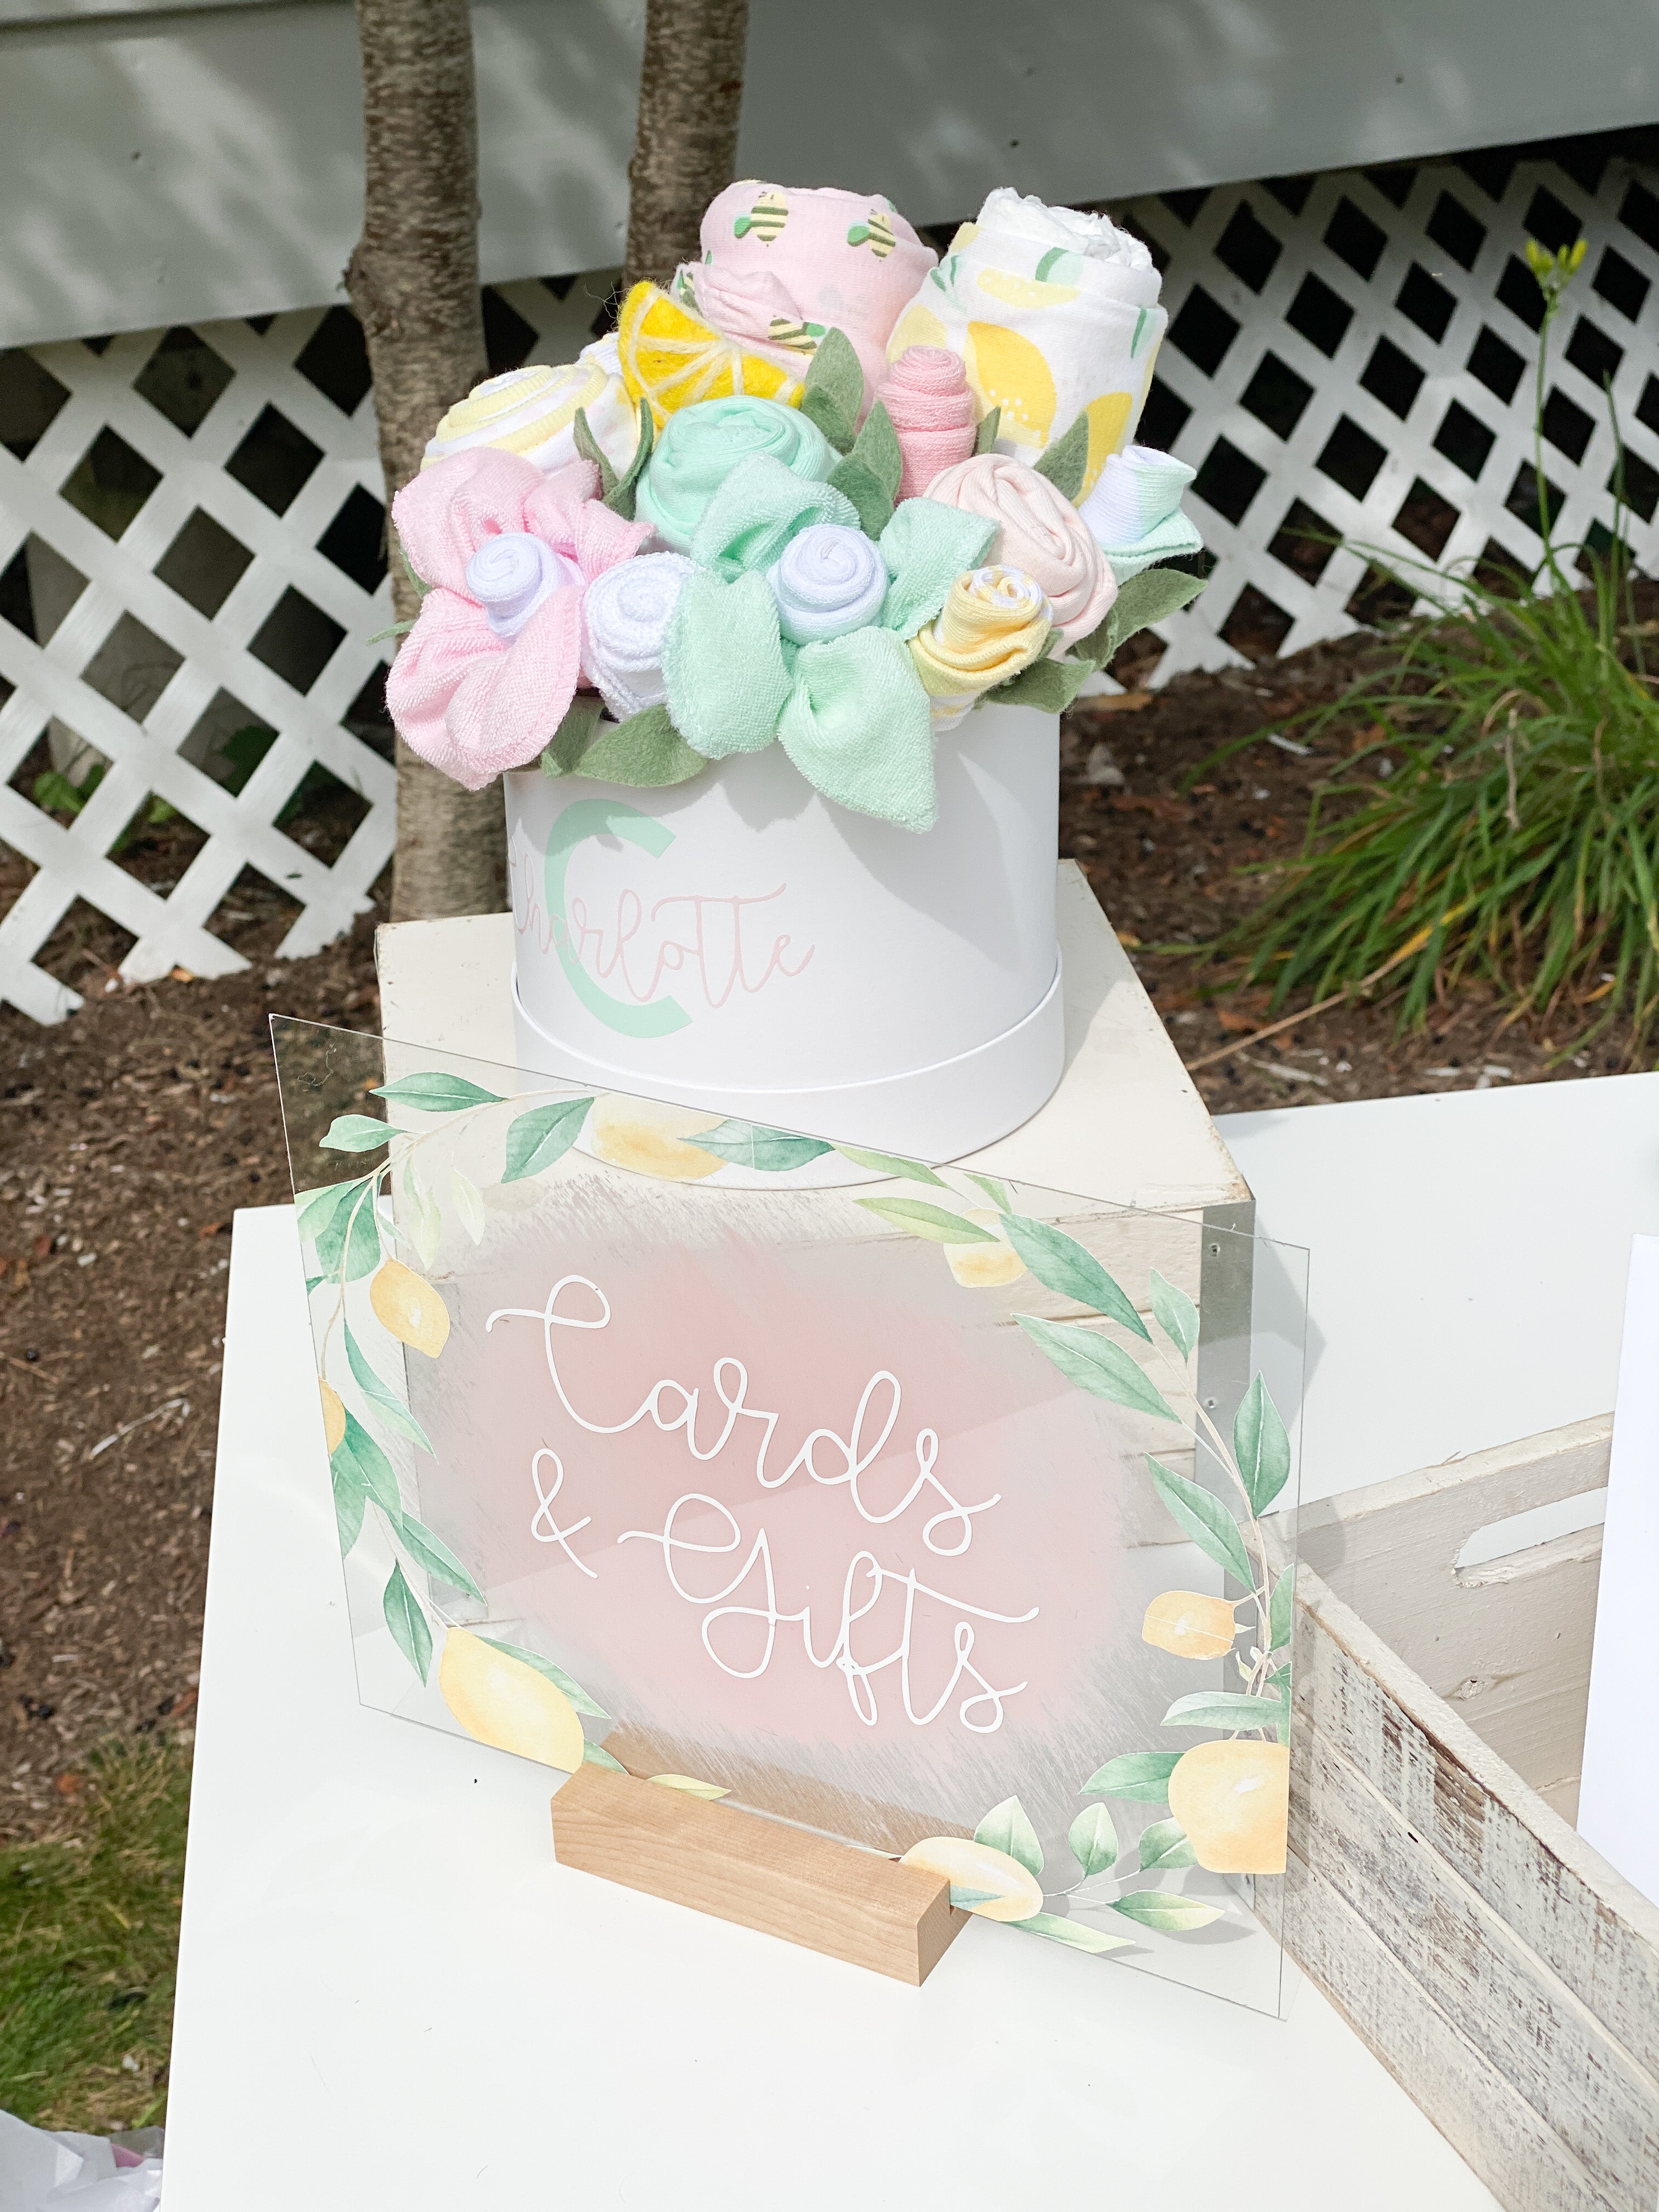 lemon baby shower gift table with baby clothing bouquet and sign